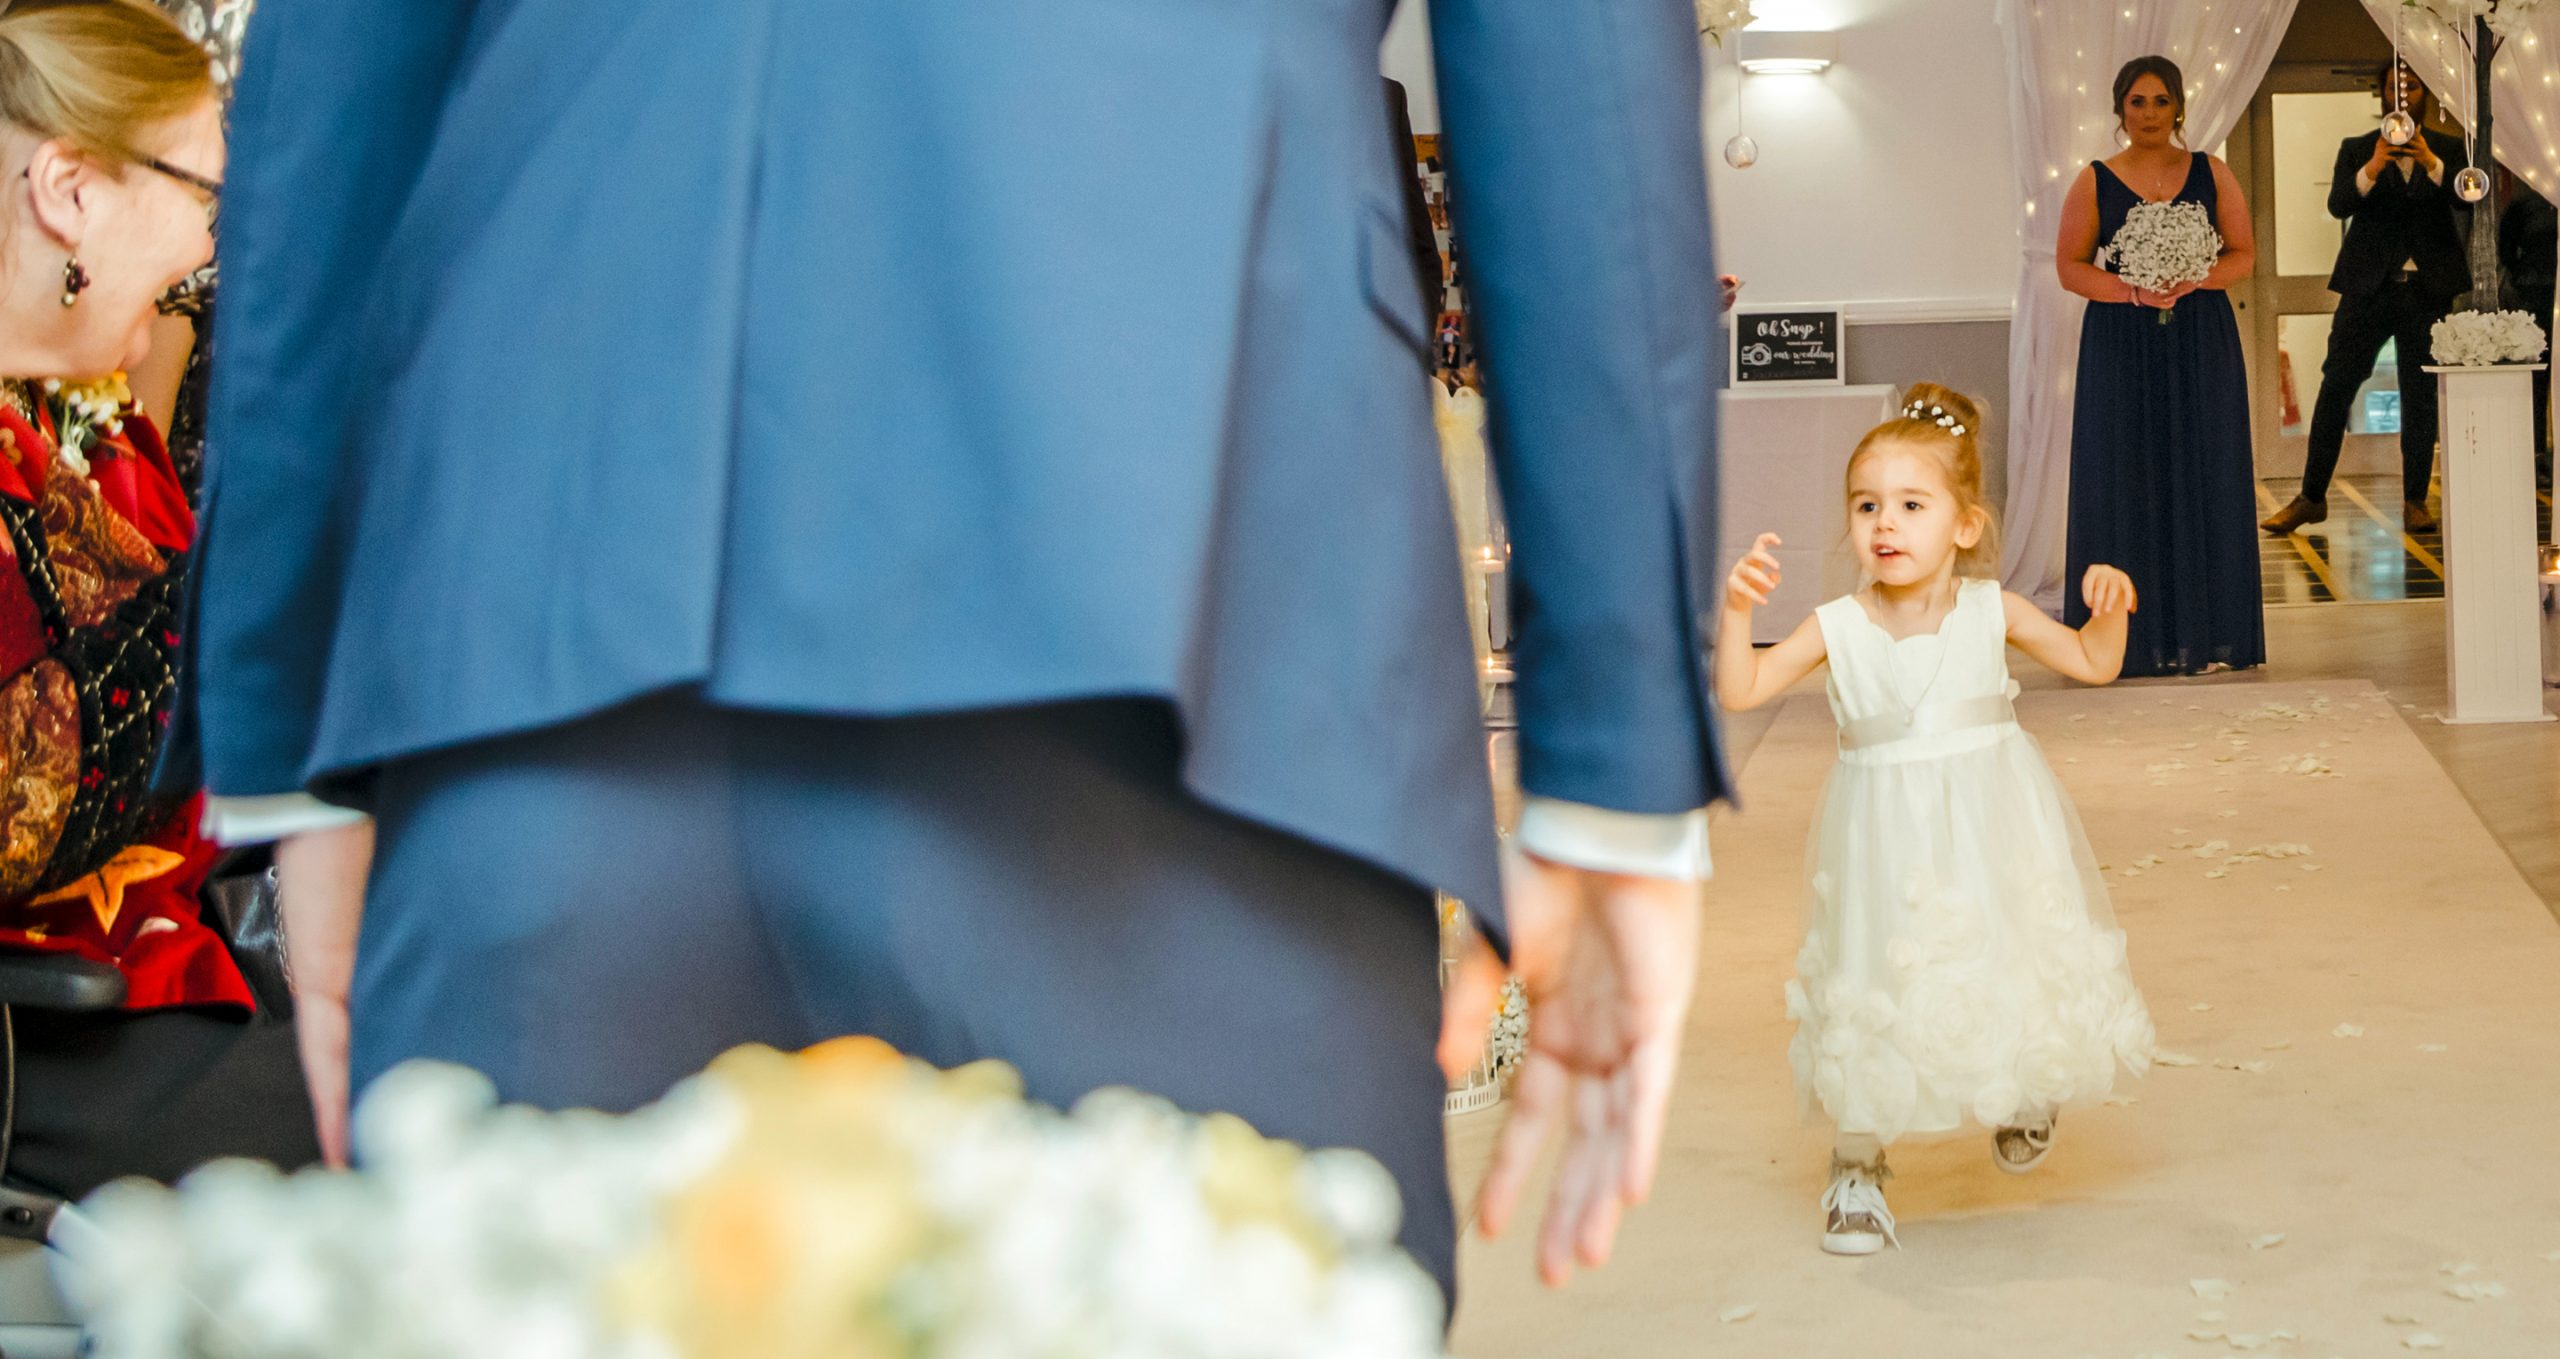 Three year old Evie’s amazing walk down the aisle     	The Leyland youngster with cerebral palsy who made her parents day.